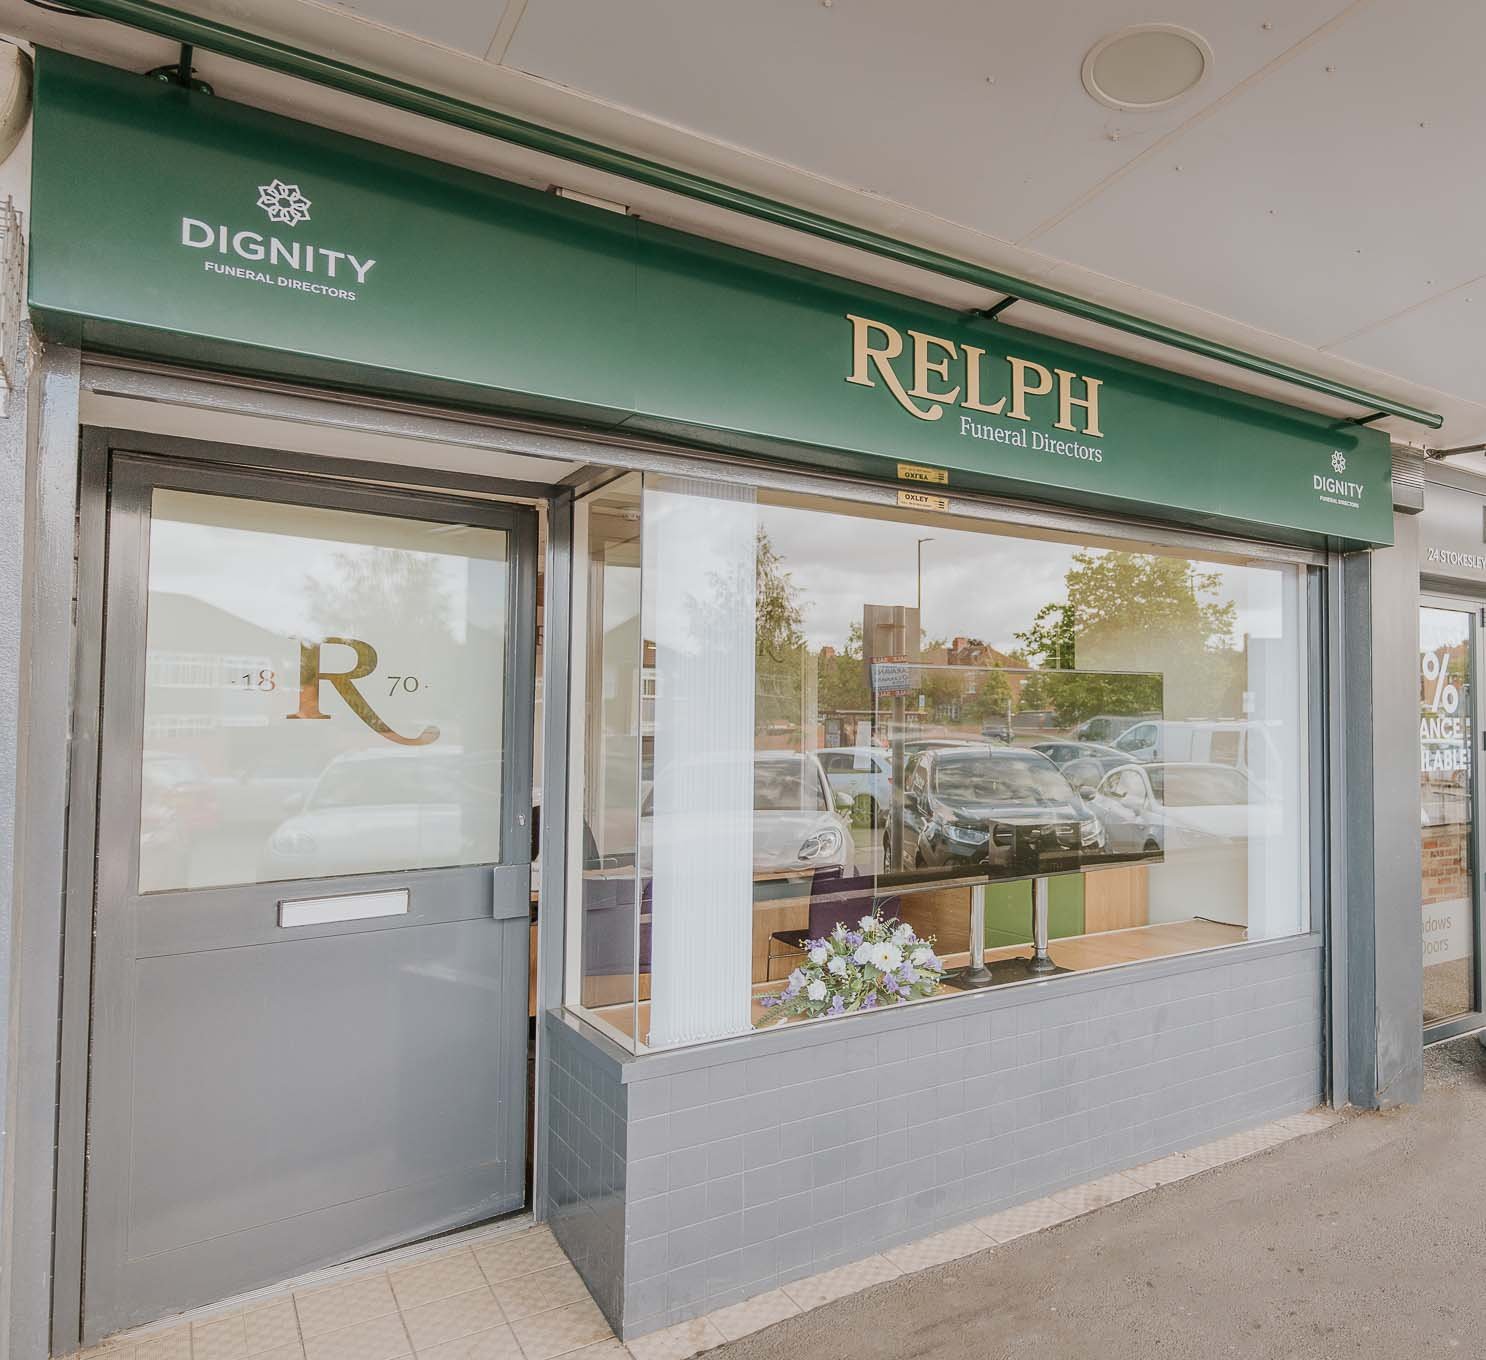 Relph Funeral Directors in Middlesbrough on Stocksley Road, Marton